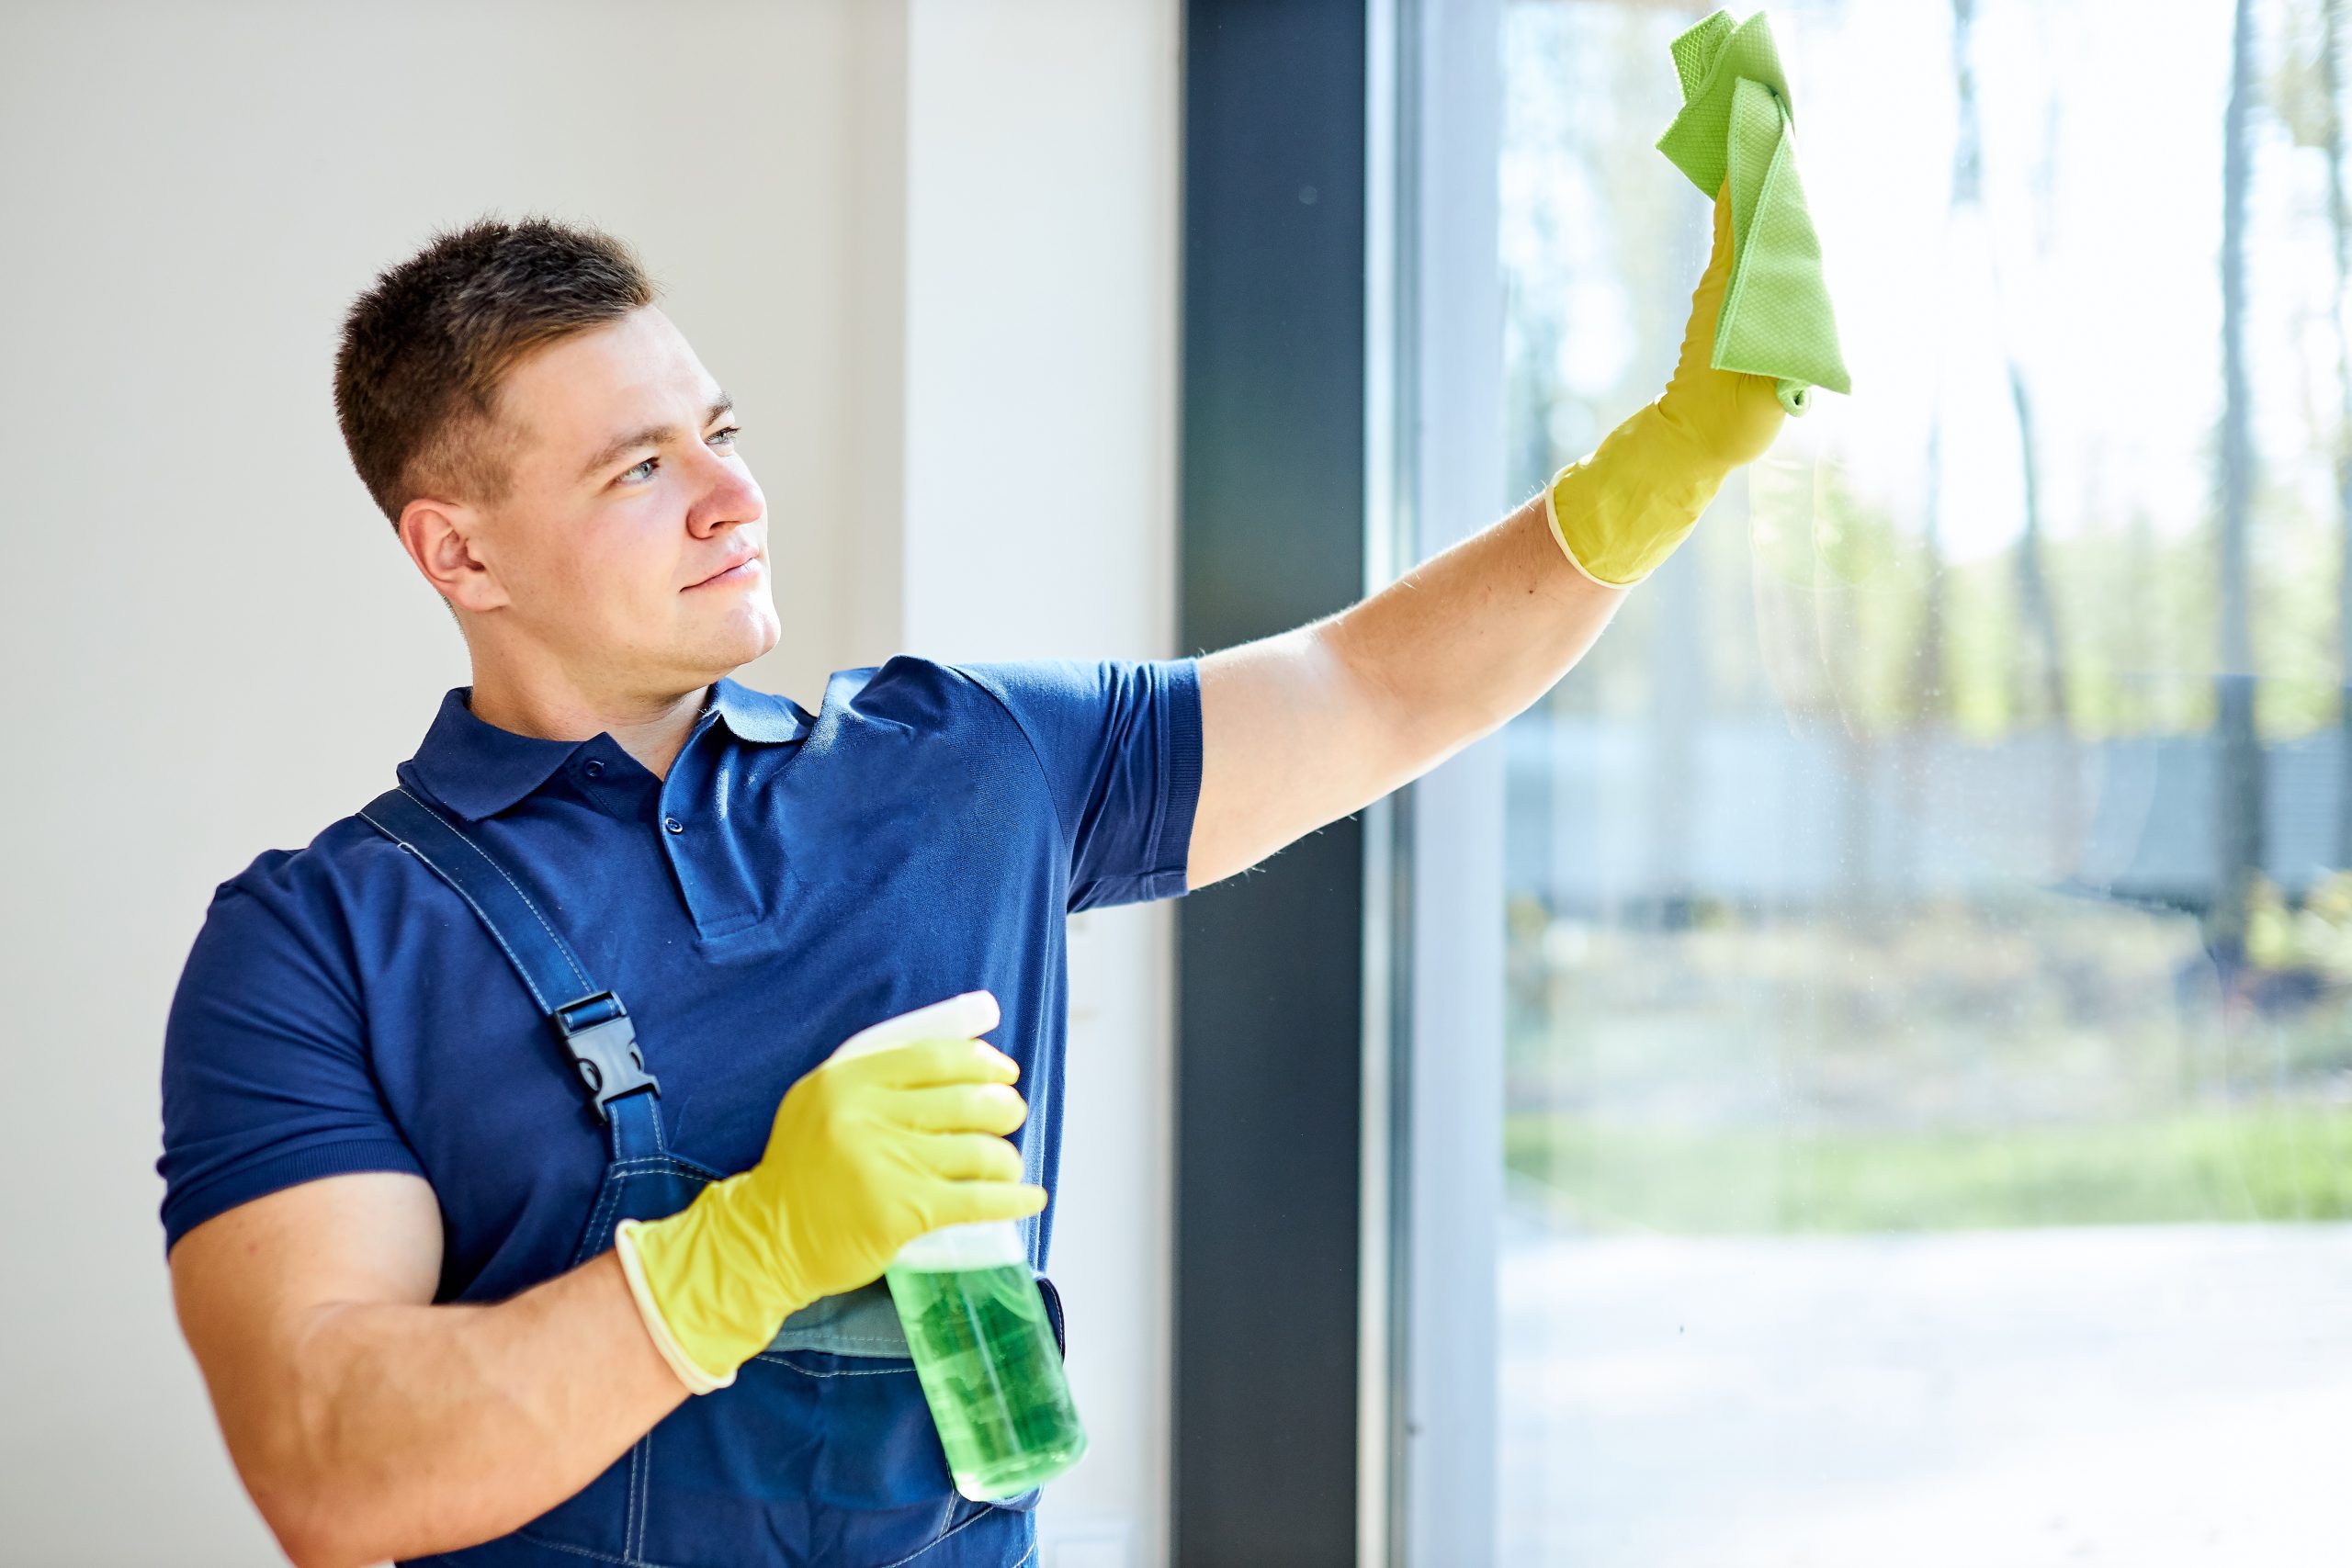 Do you offer one-time or regular cleaning services?